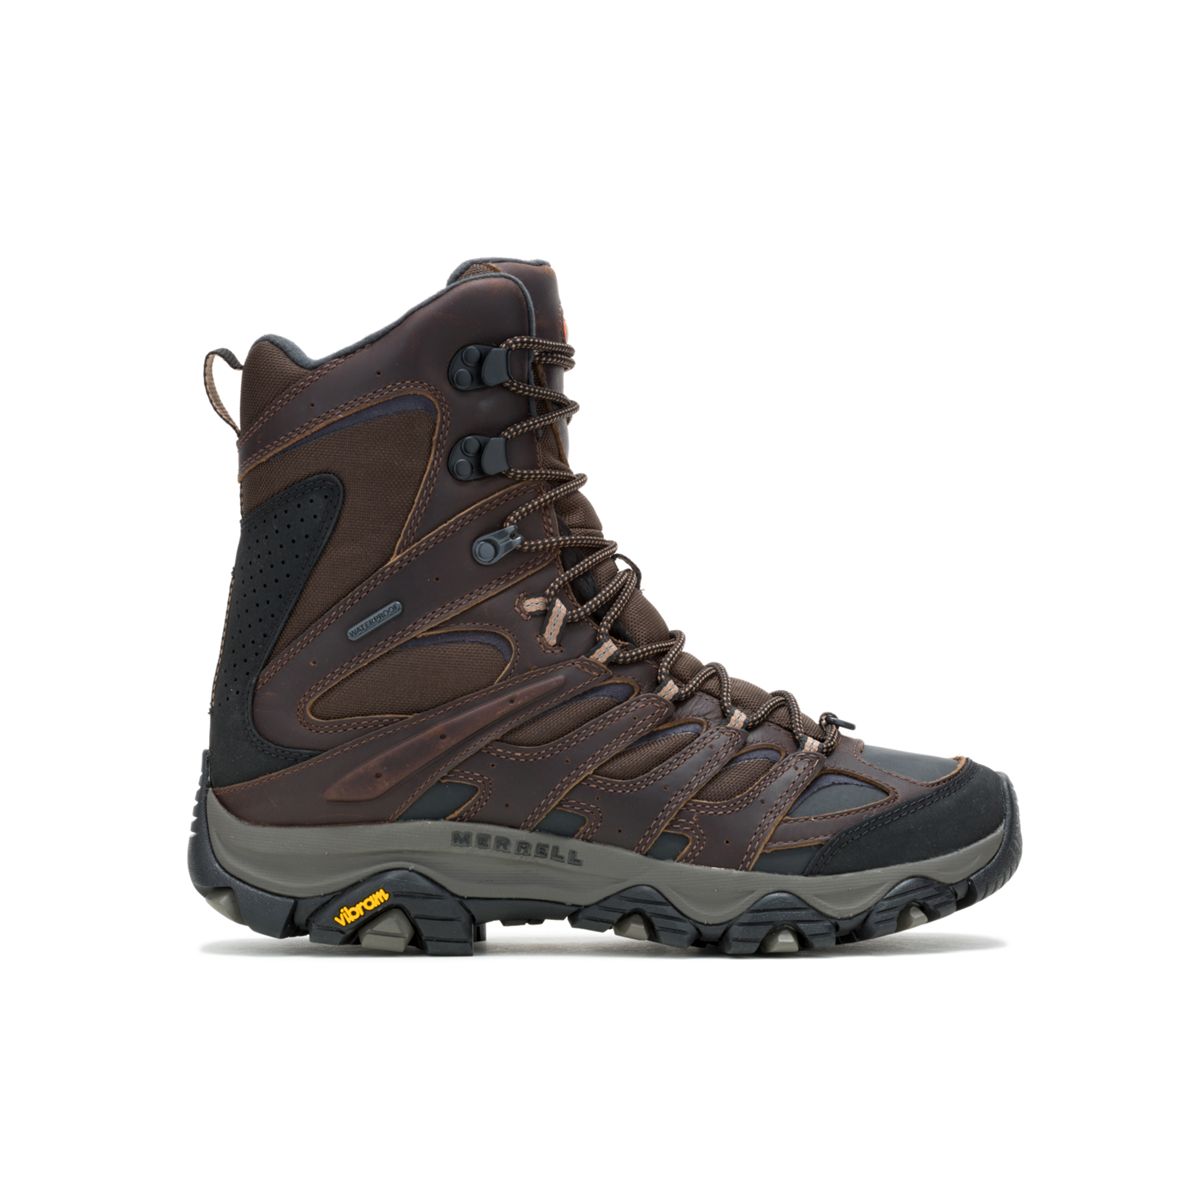 Moab 3 Thermo Xtreme Waterproof, Earth, dynamic